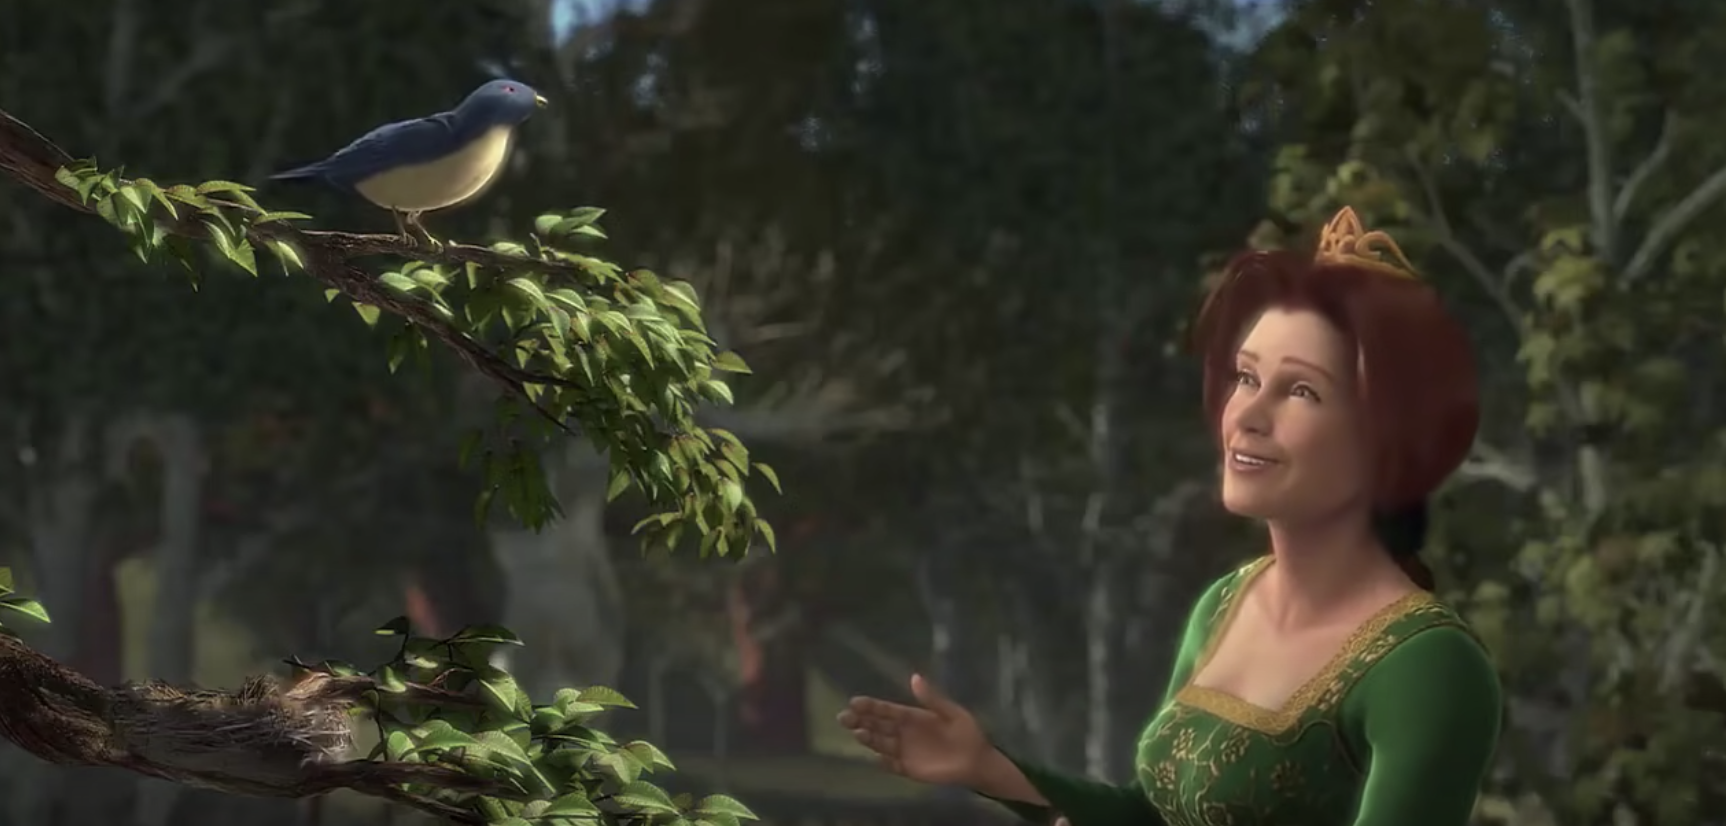 A woman sings to a bird